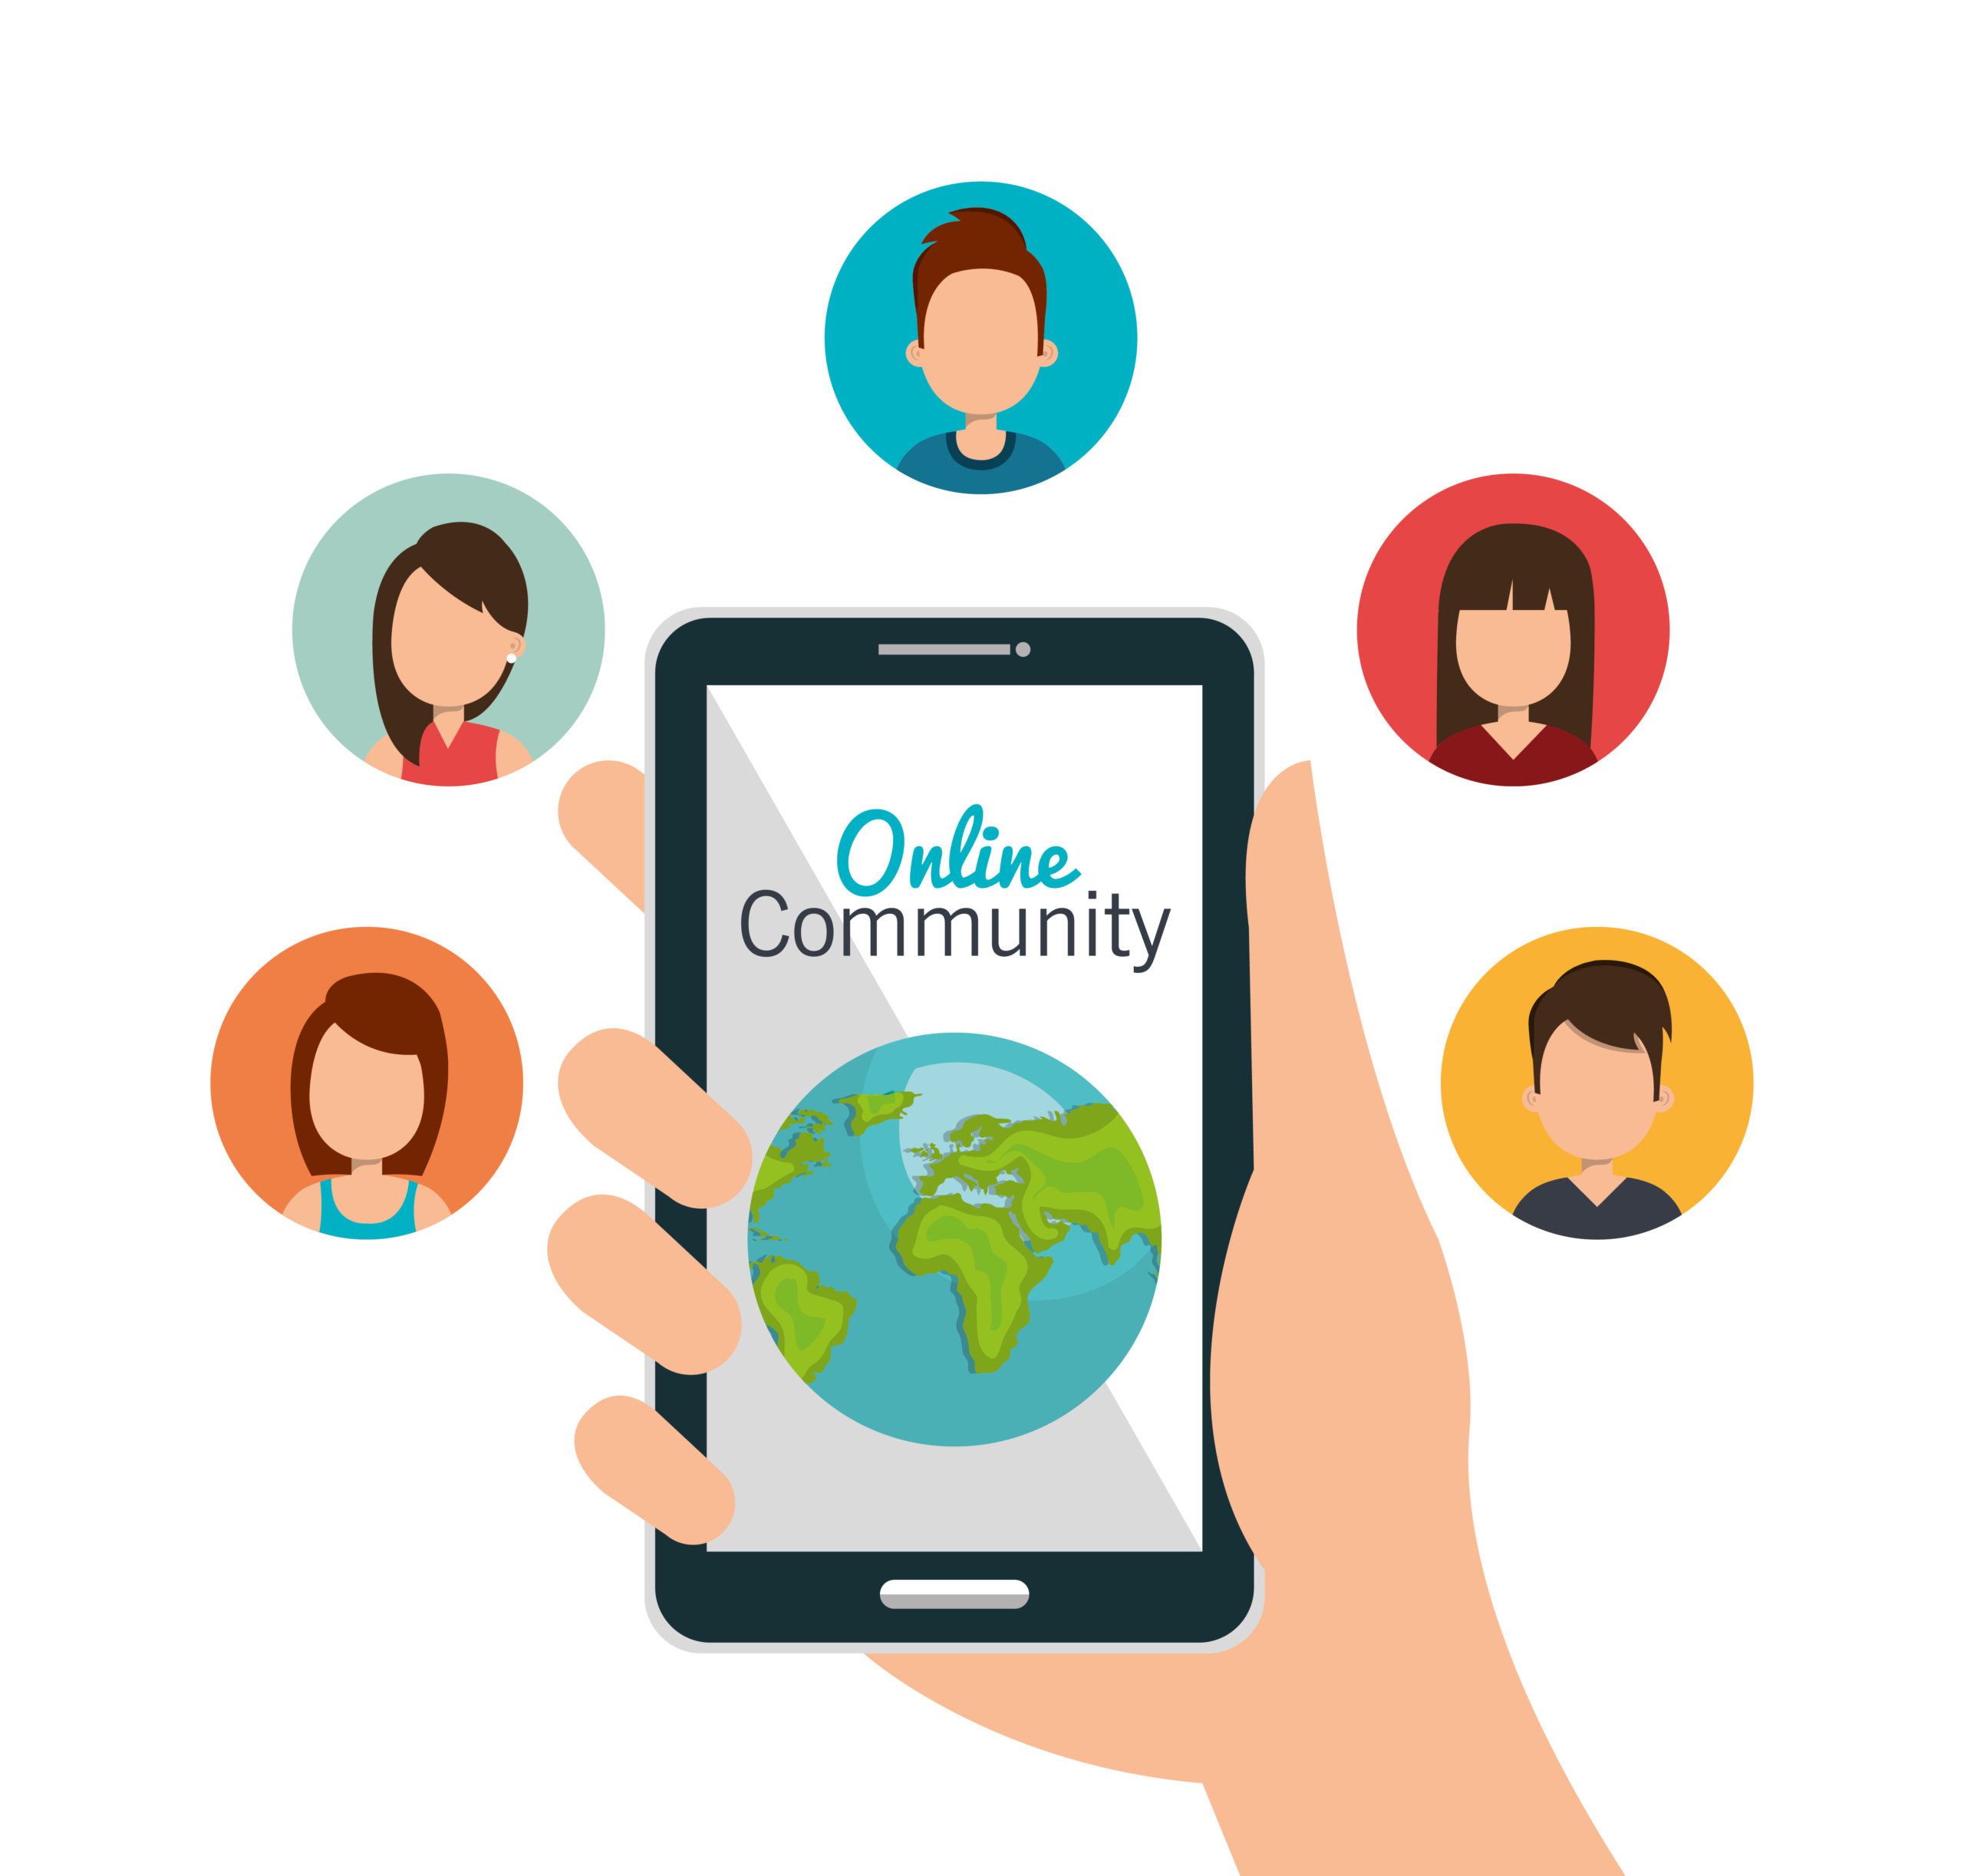 Hrer is your online community where your drteams come true.
